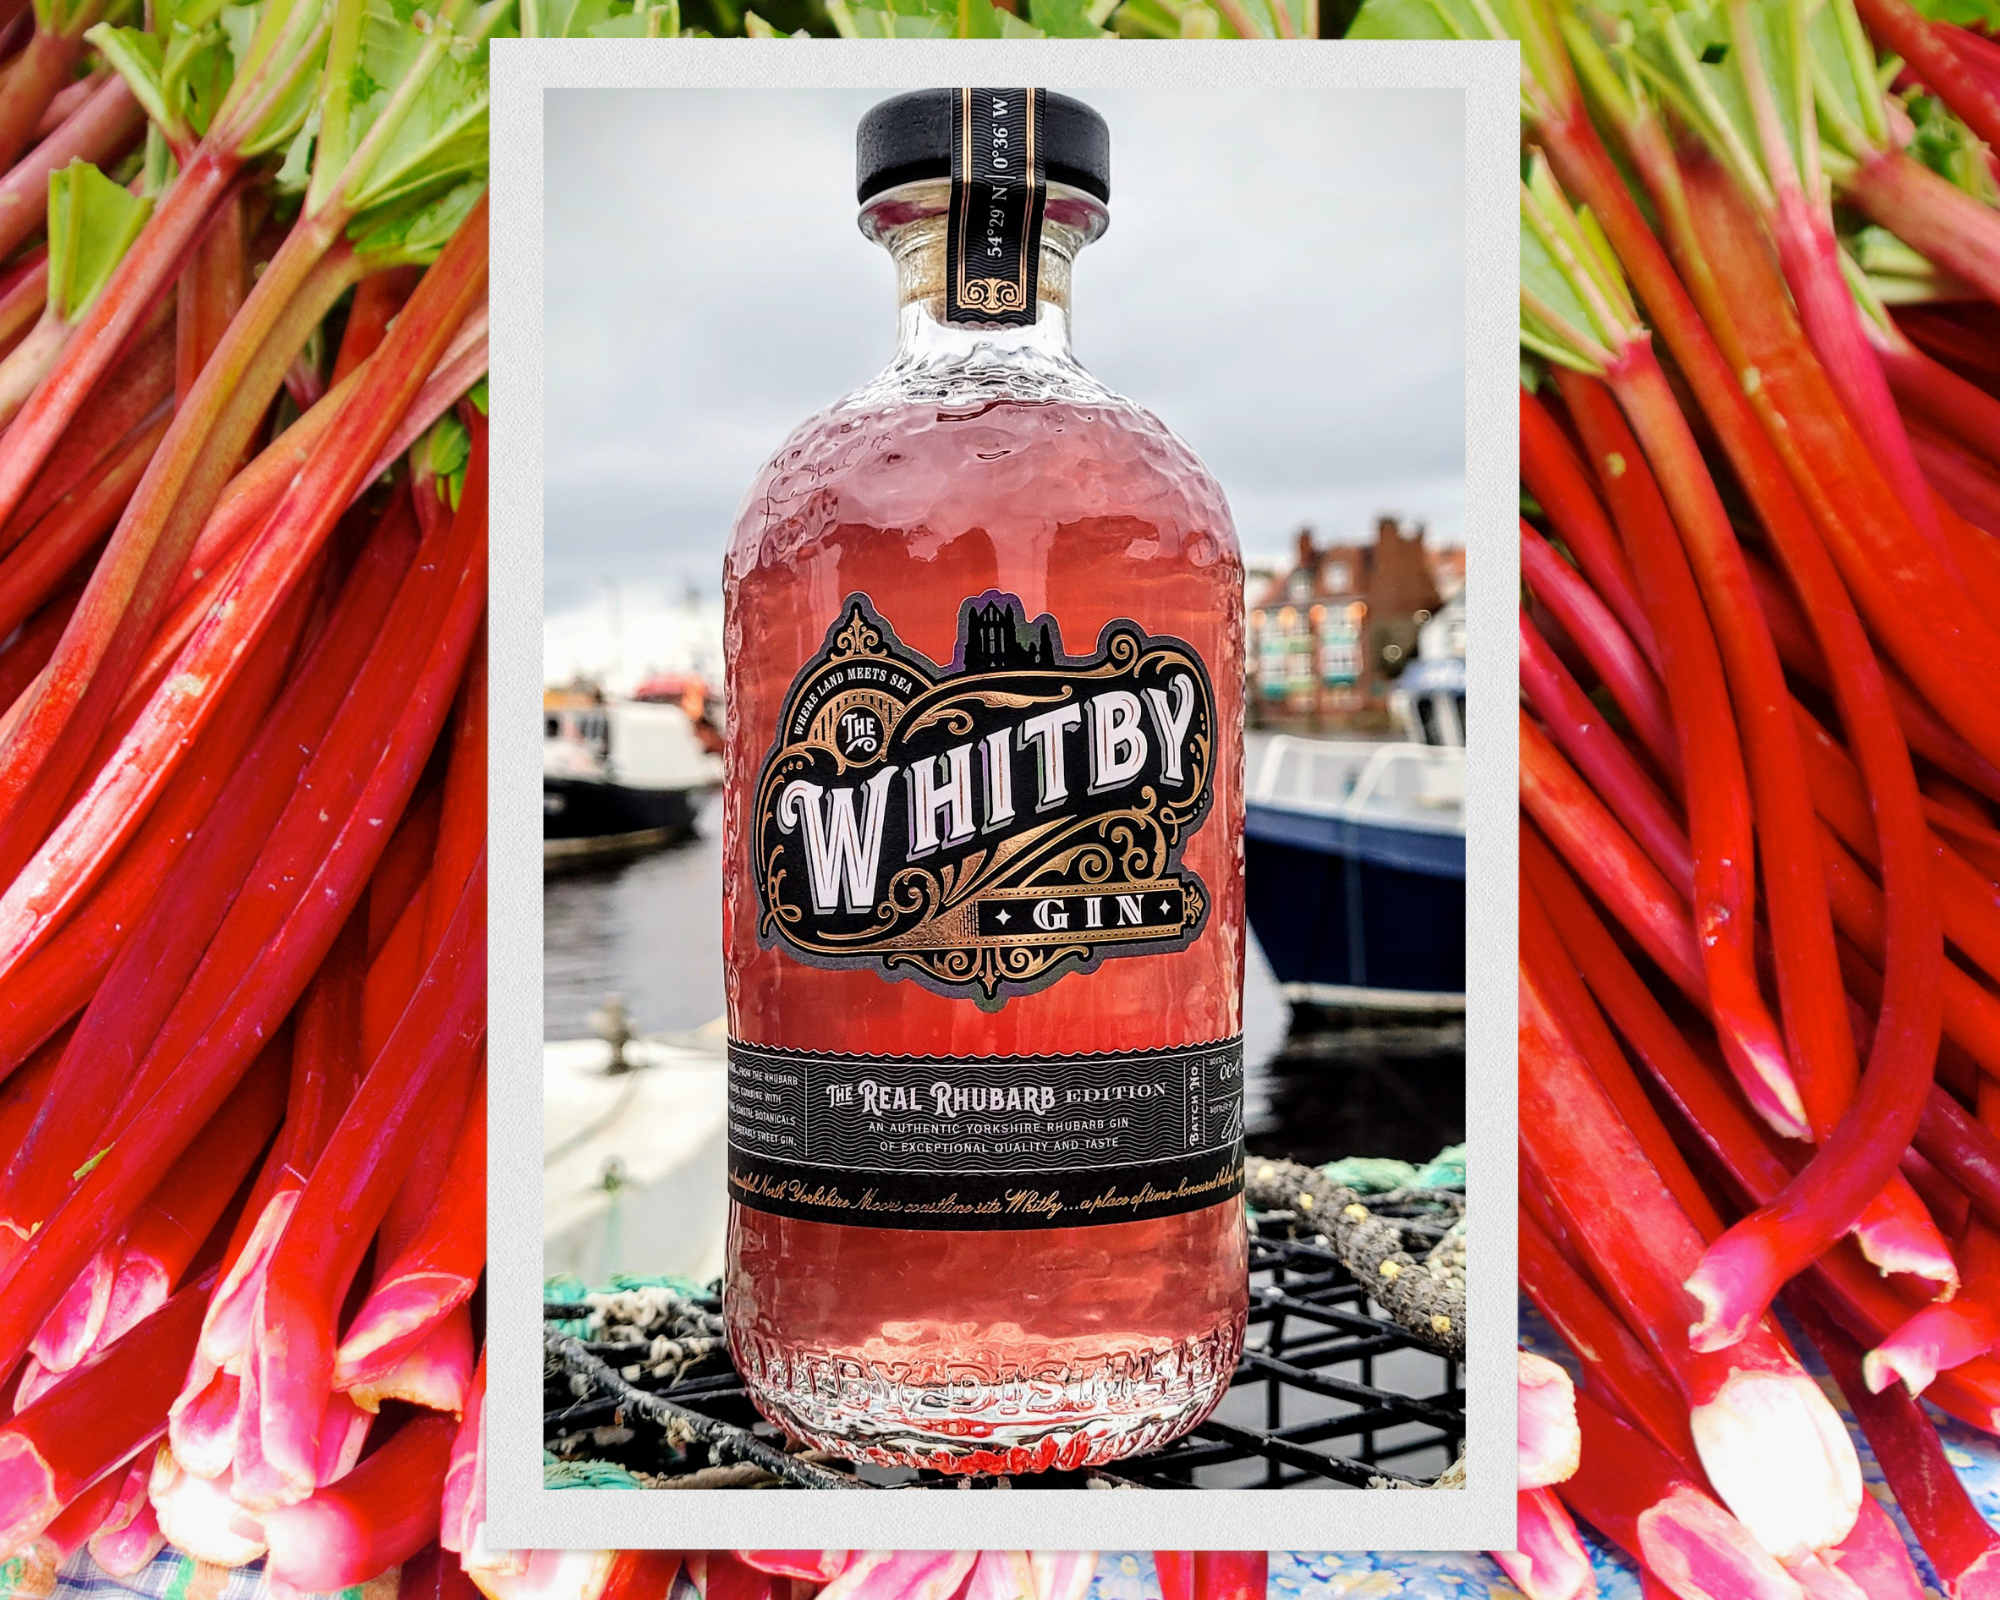 Rediscovering the Authentic: The Journey of Our Yorkshire Rhubarb Gin